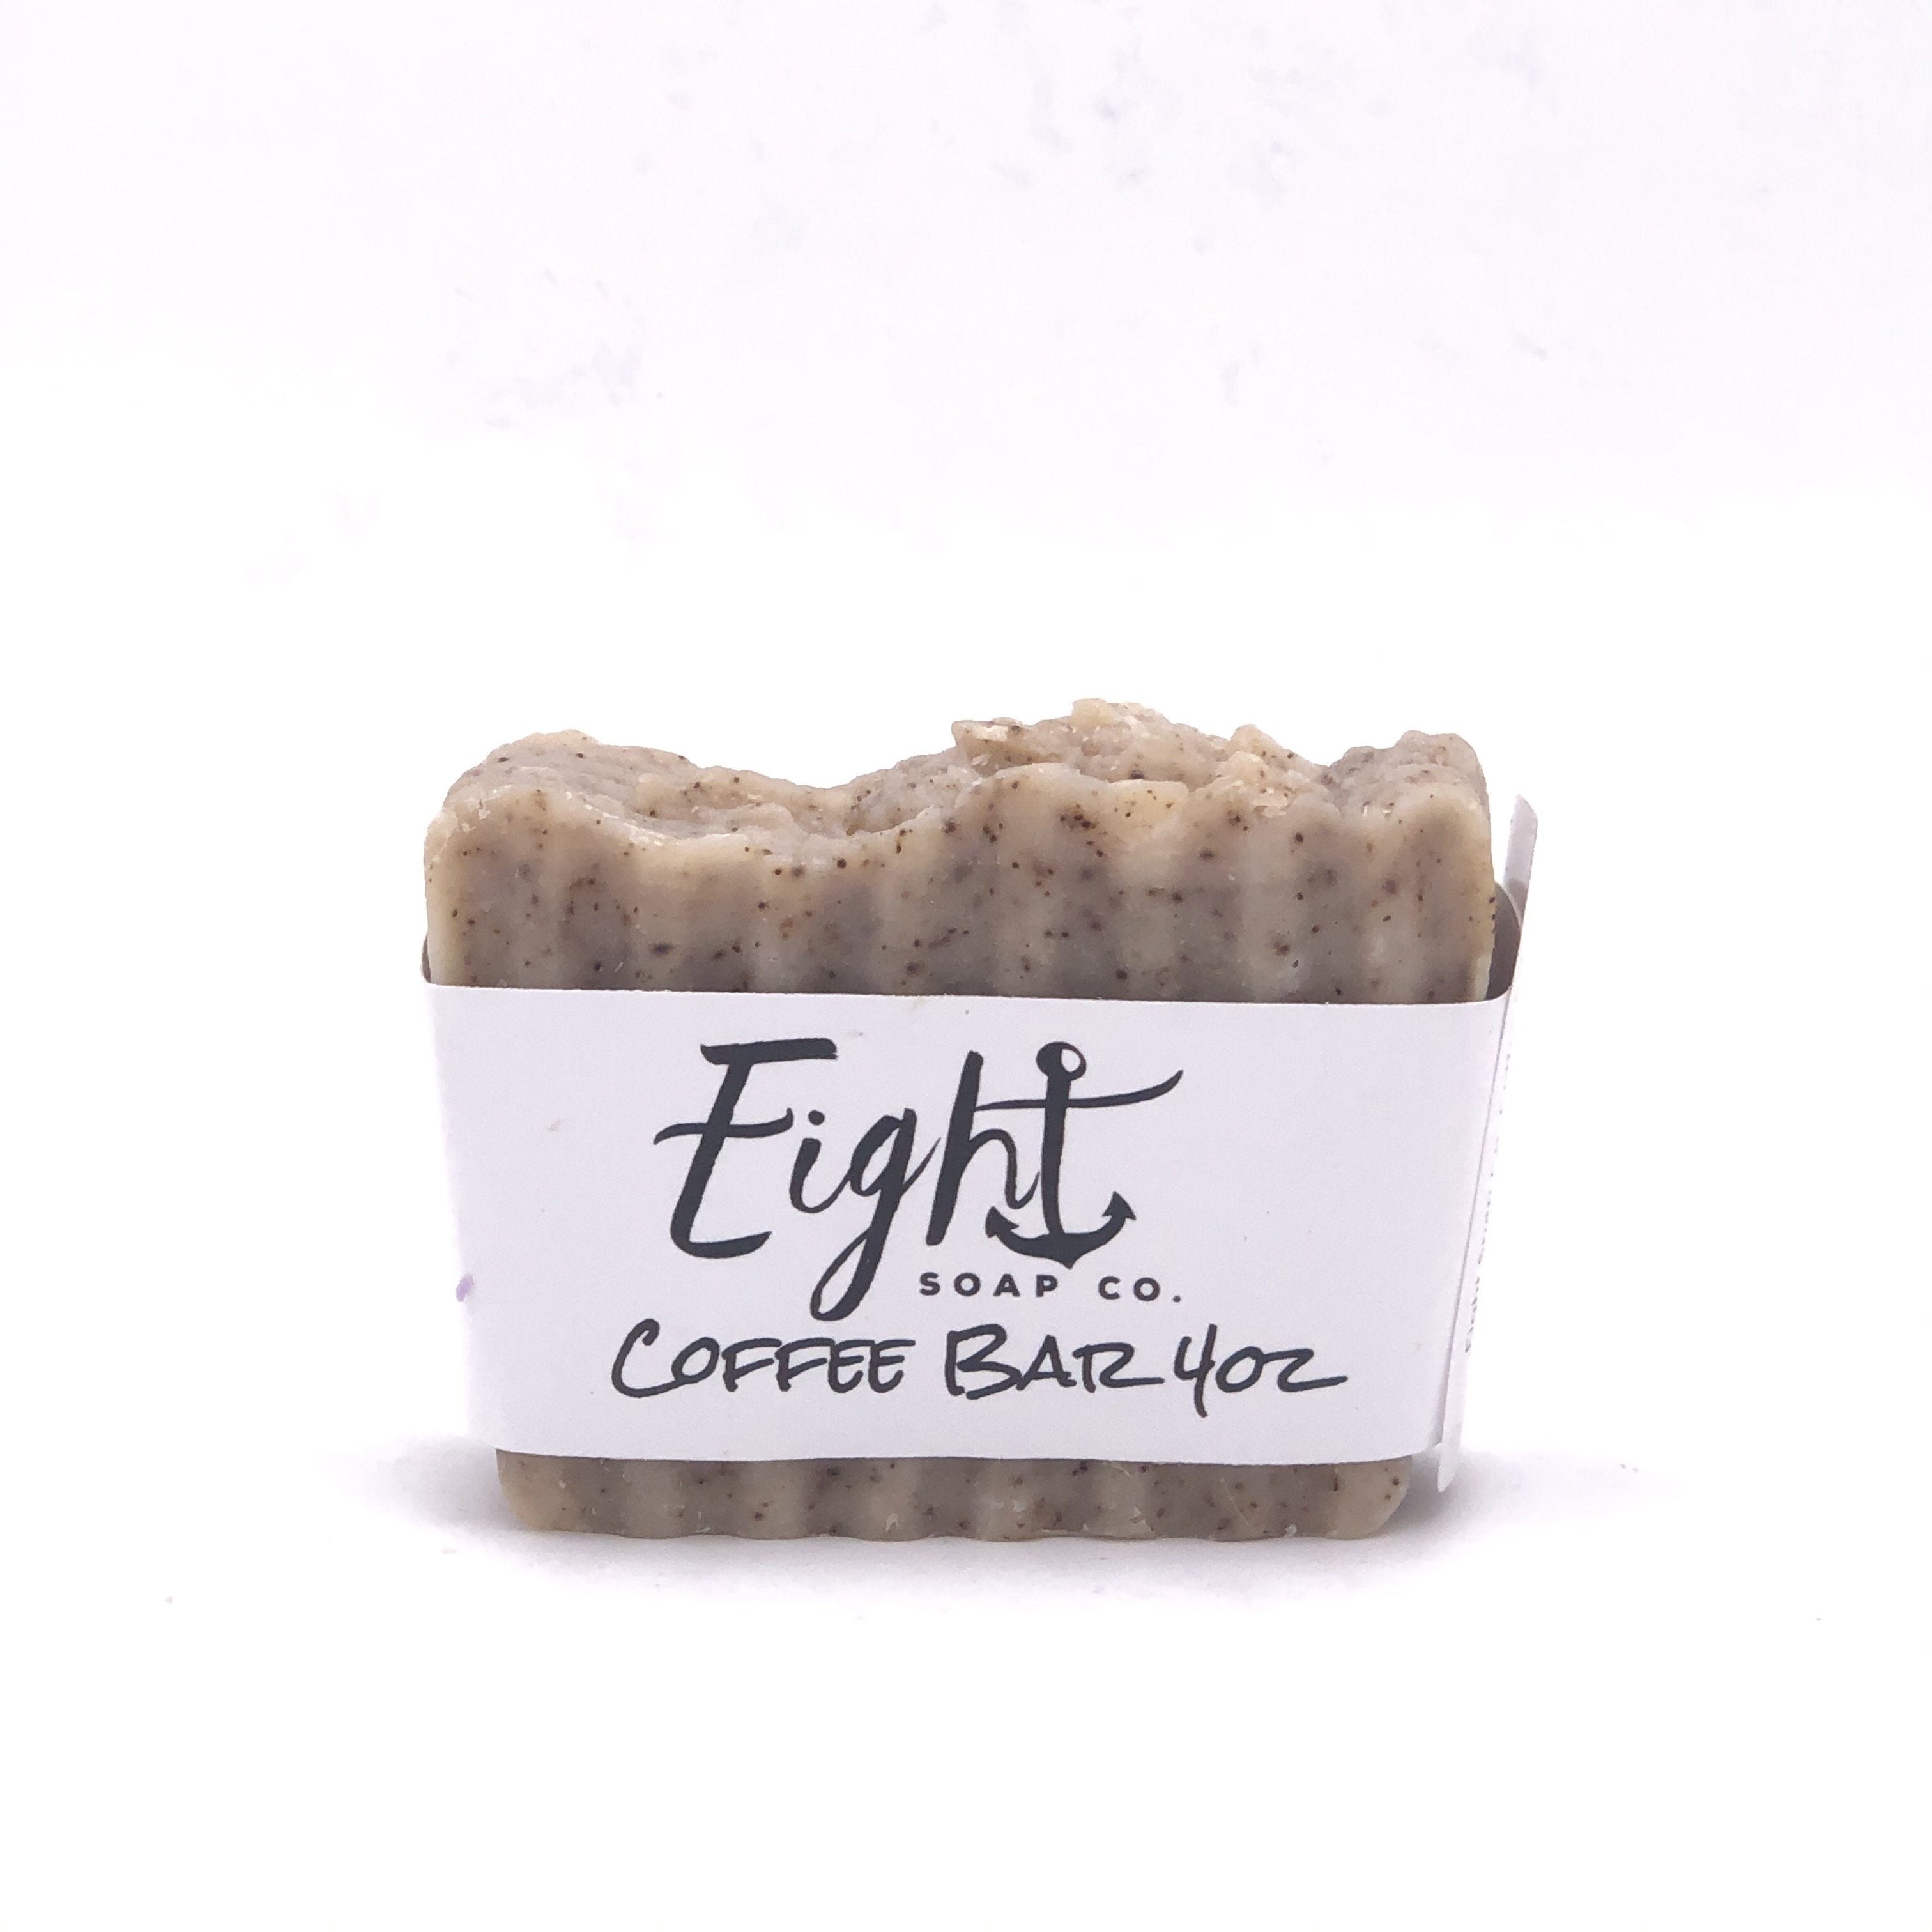 Eight Soap Co. Coffee Soap Bar